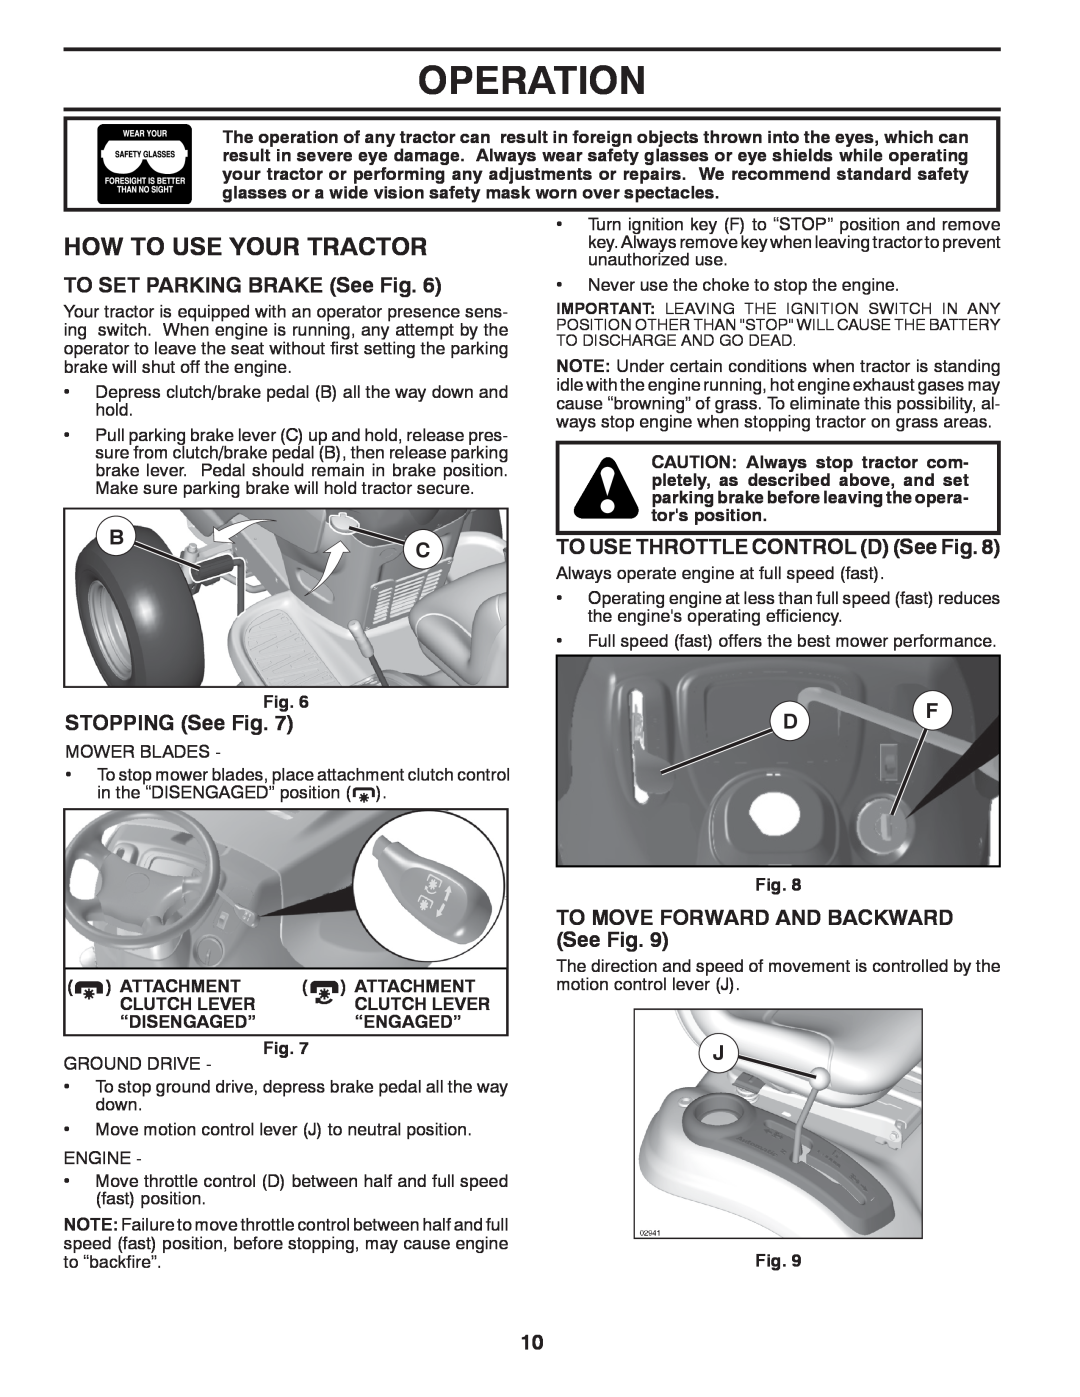 Poulan 532 43 84-93 How To Use Your Tractor, TO SET PARKING BRAKE See Fig, TO USE THROTTLE CONTROL D See Fig, Operation 